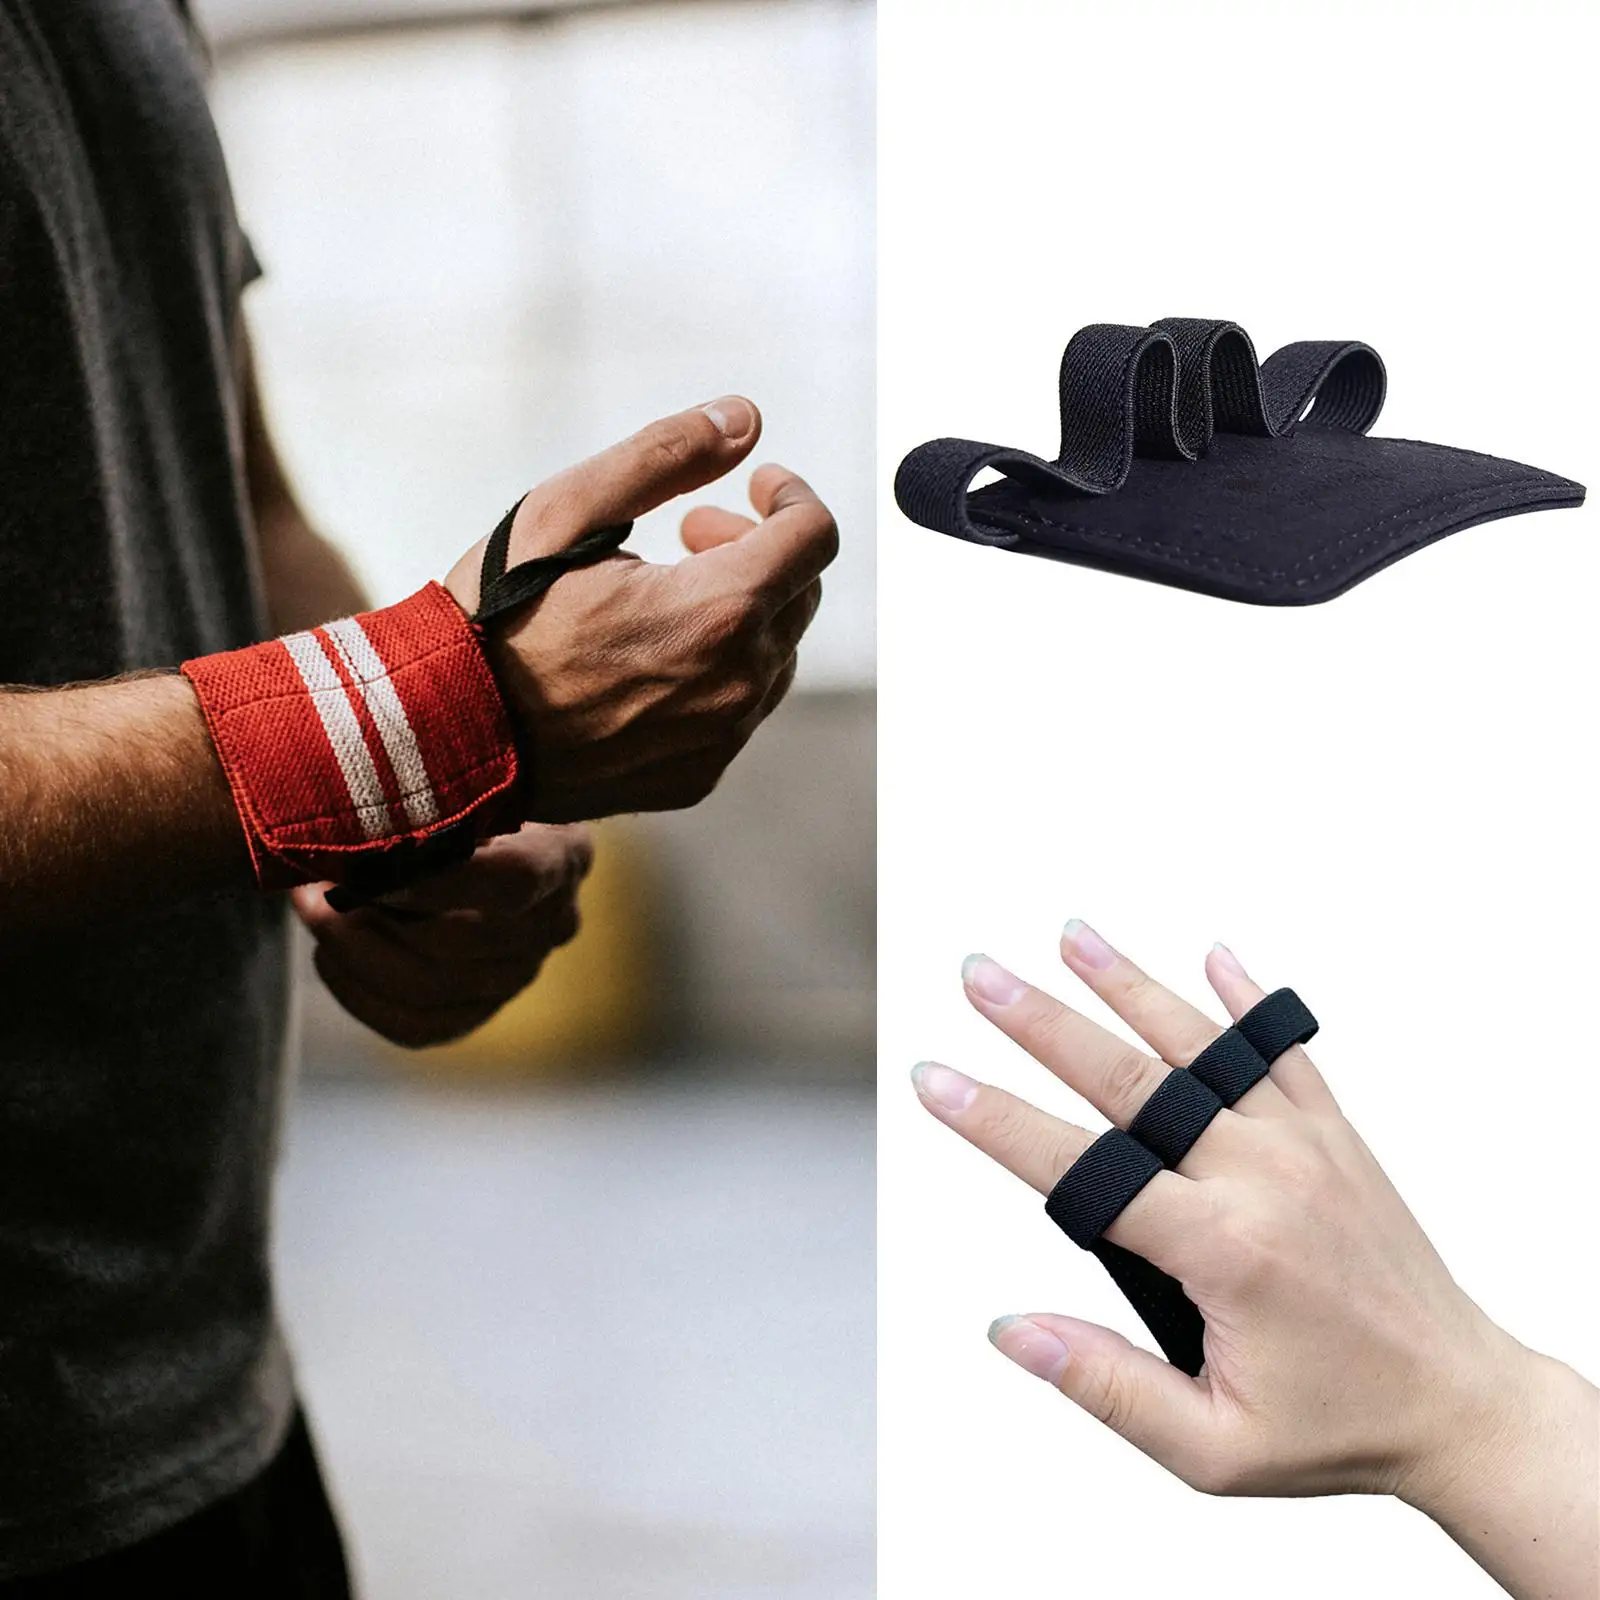  Pad, 4 Hand Guard ,Avoid Calluses ,Workout Gloves for Weightlifting Body Building Exercise Calisthenics Powerlifting